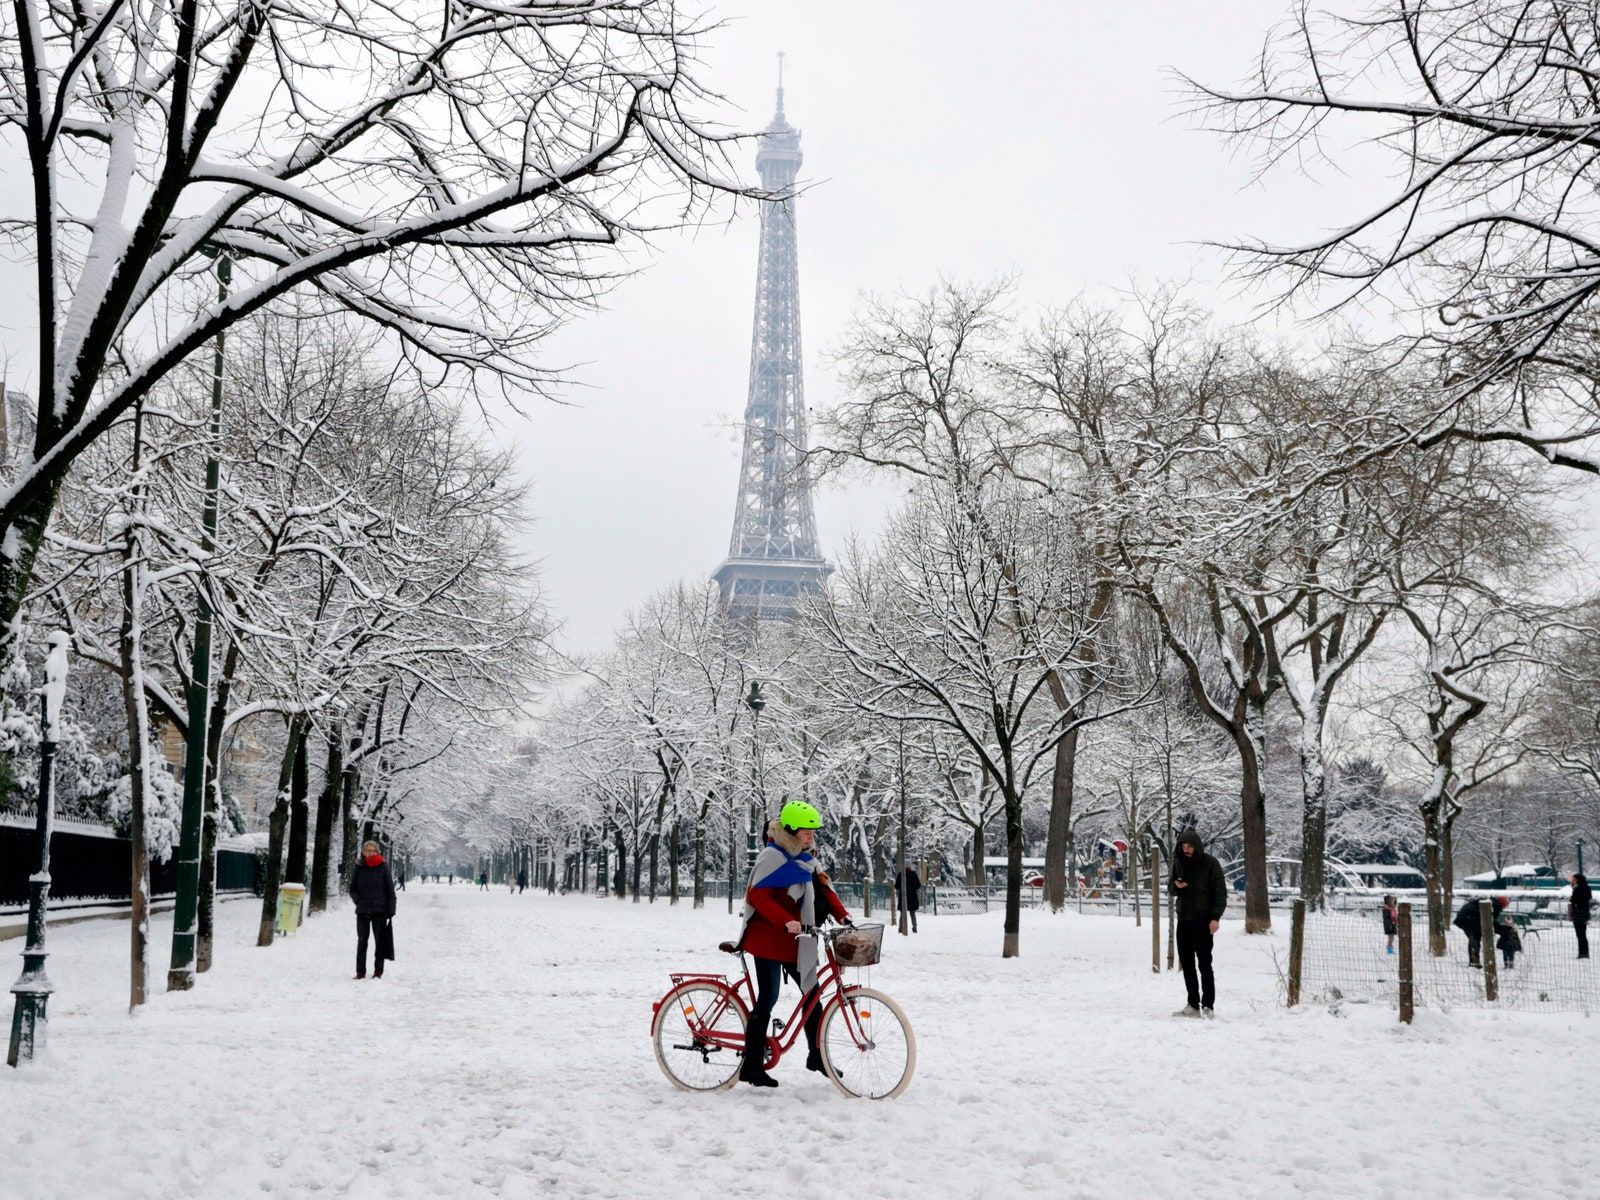 The Eiffel Tower Is Closed Due to Inclement Weather Across France. Condé Nast Traveler